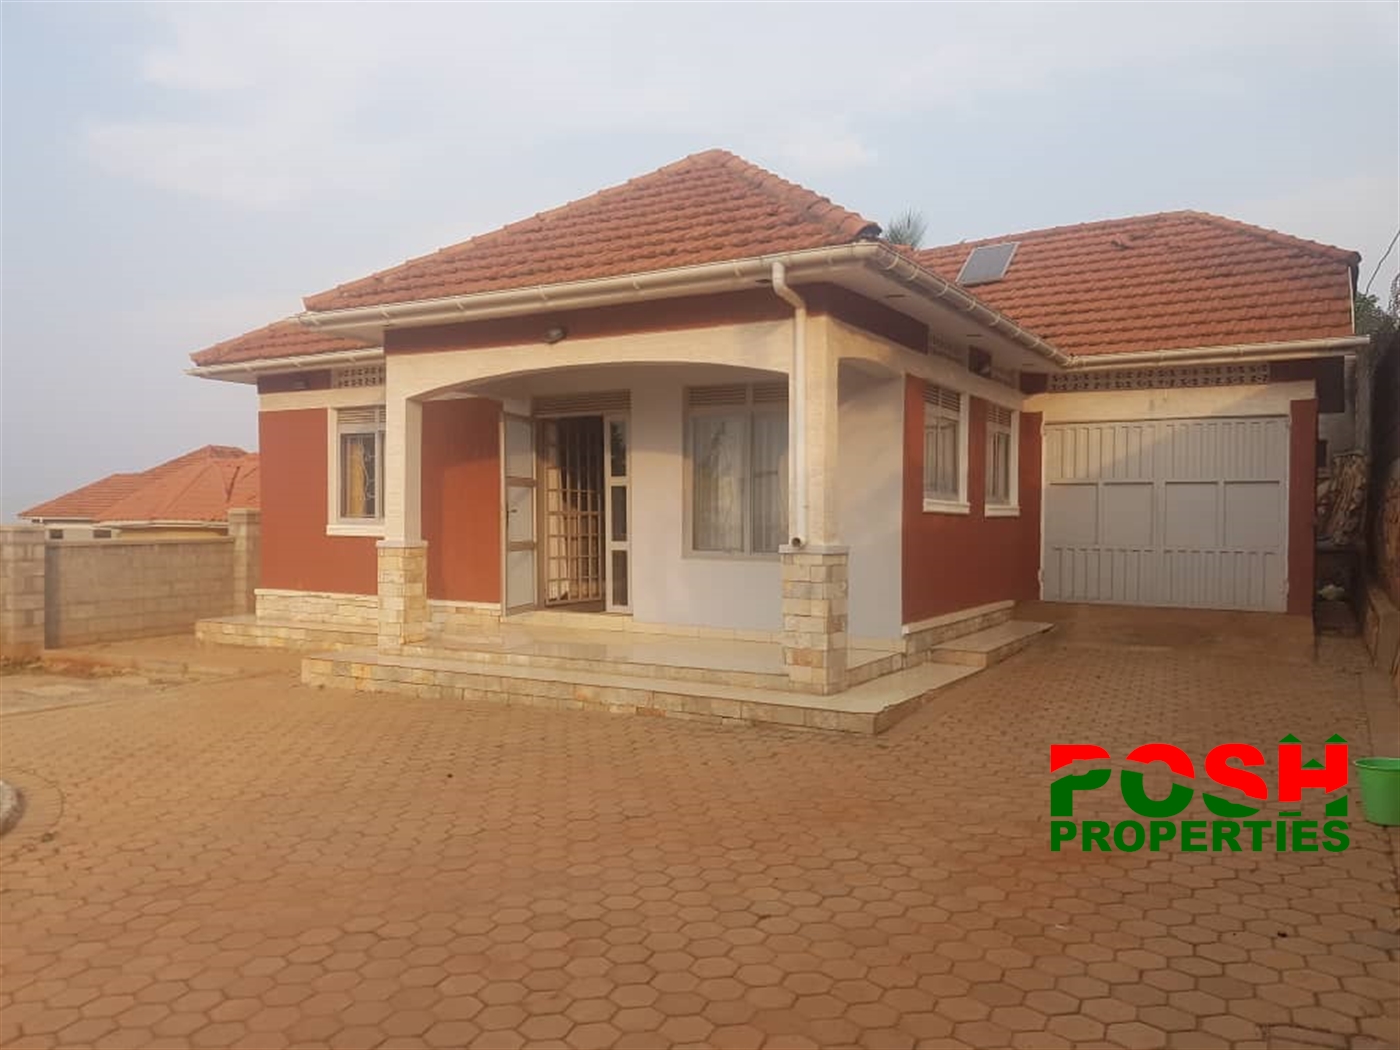 Bungalow for rent in Bbiira Mubende